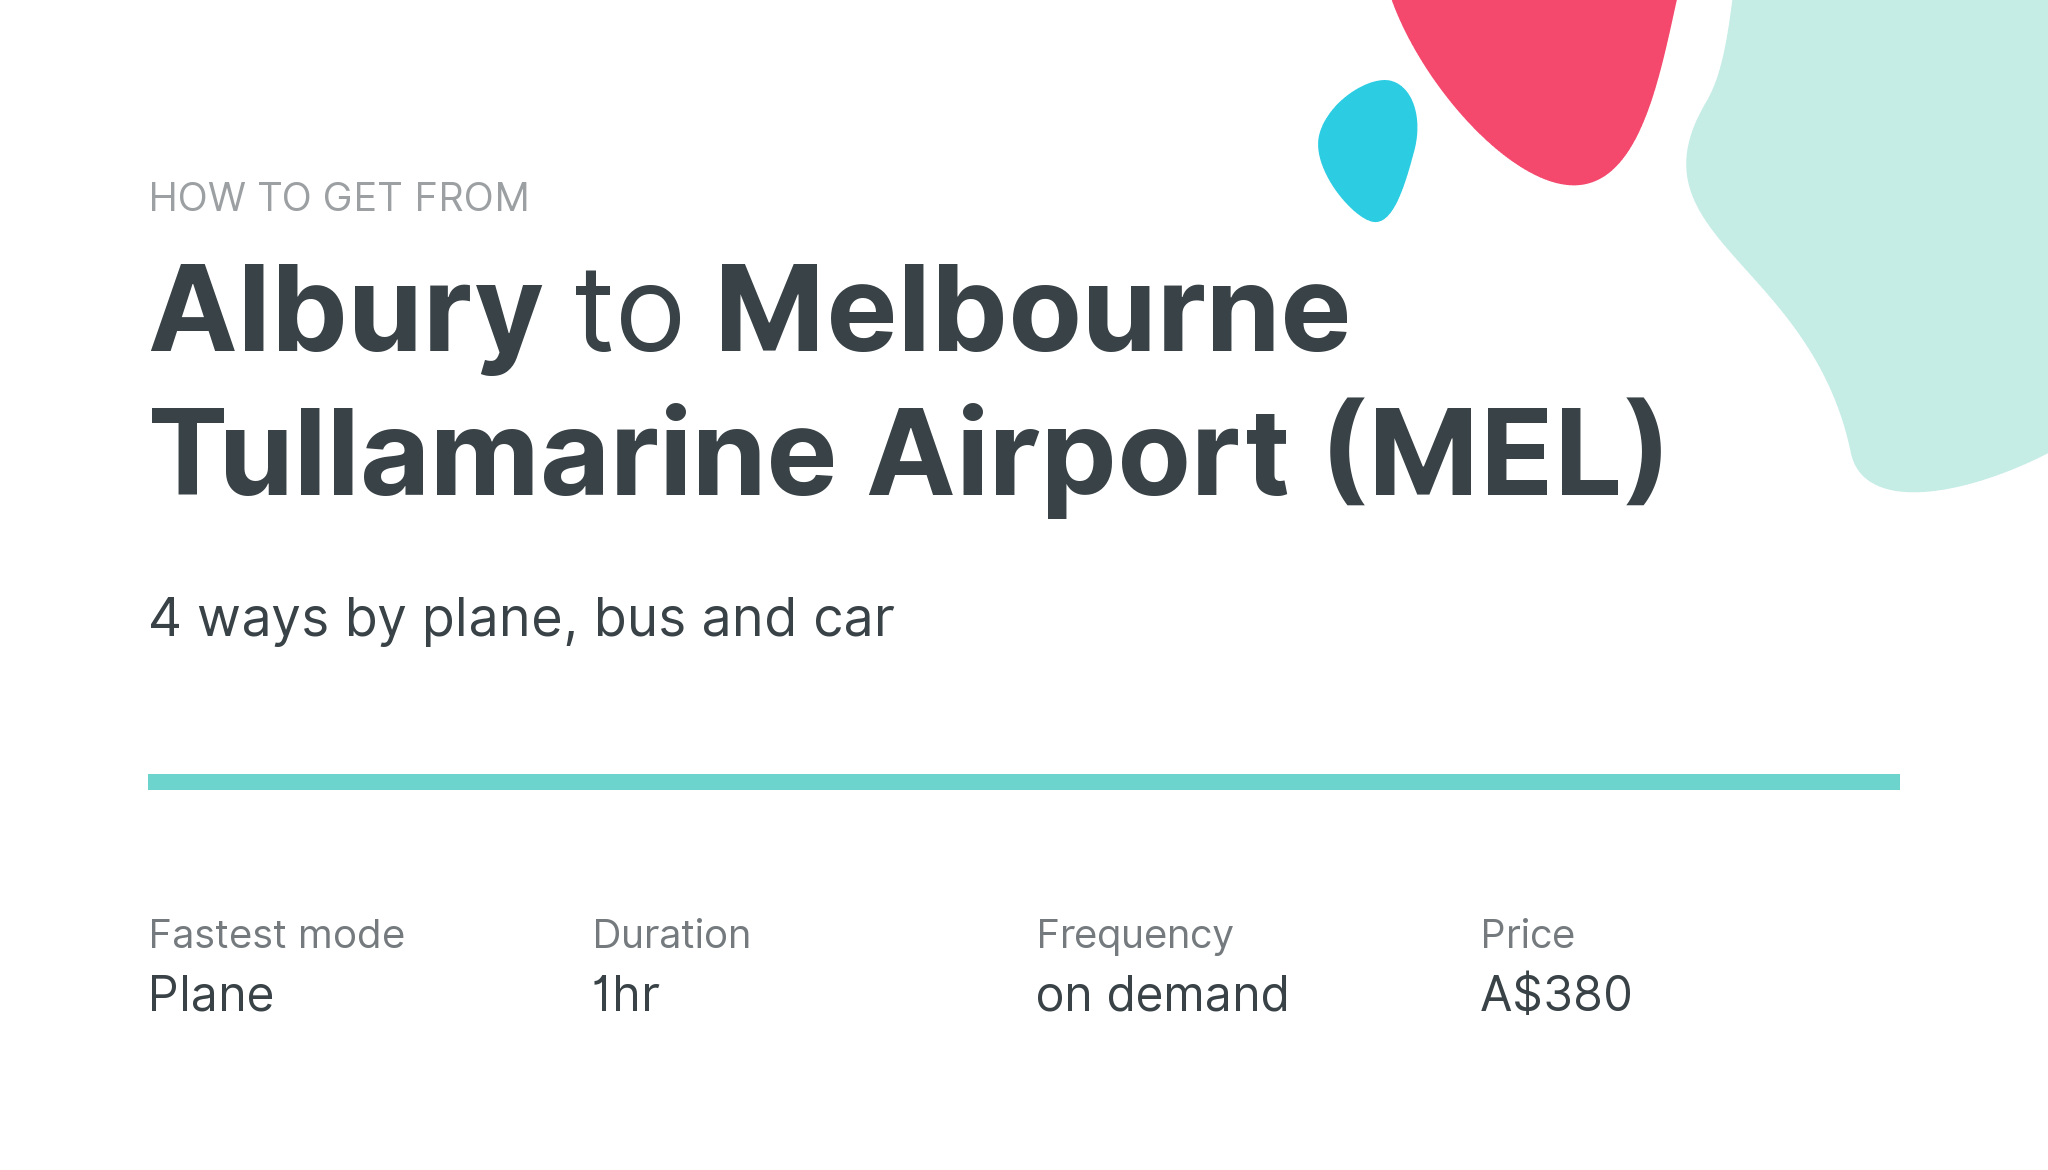 How do I get from Albury to Melbourne Tullamarine Airport (MEL)